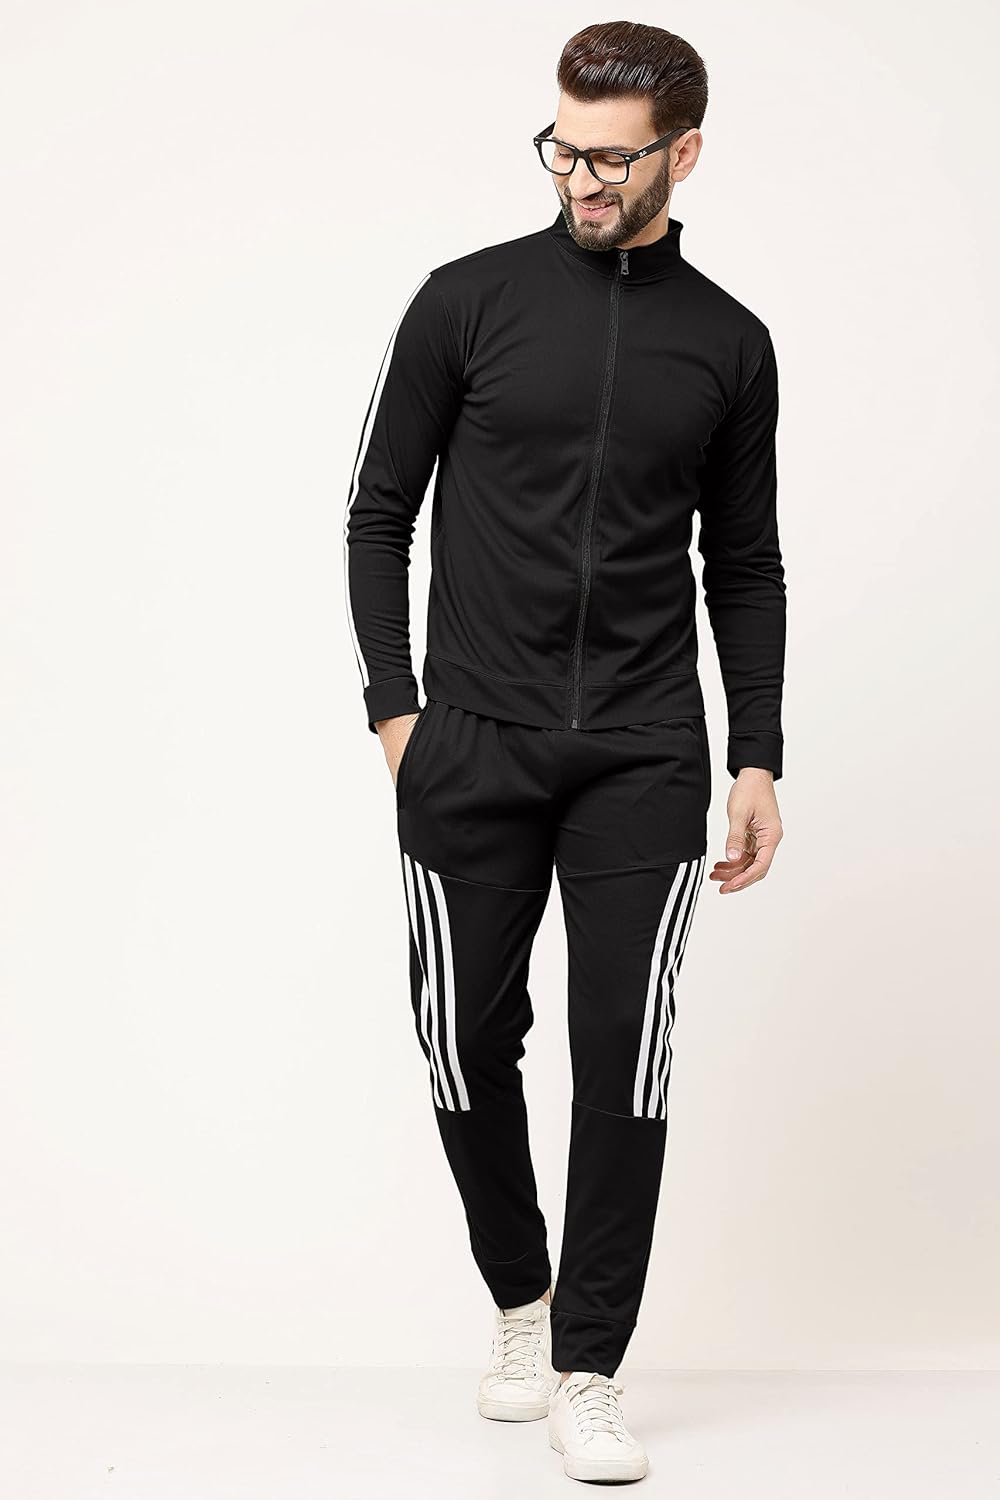 Dry Fit Addi Track Suit Set for Men | Slim Fit Perfect for Jogging and Lounging